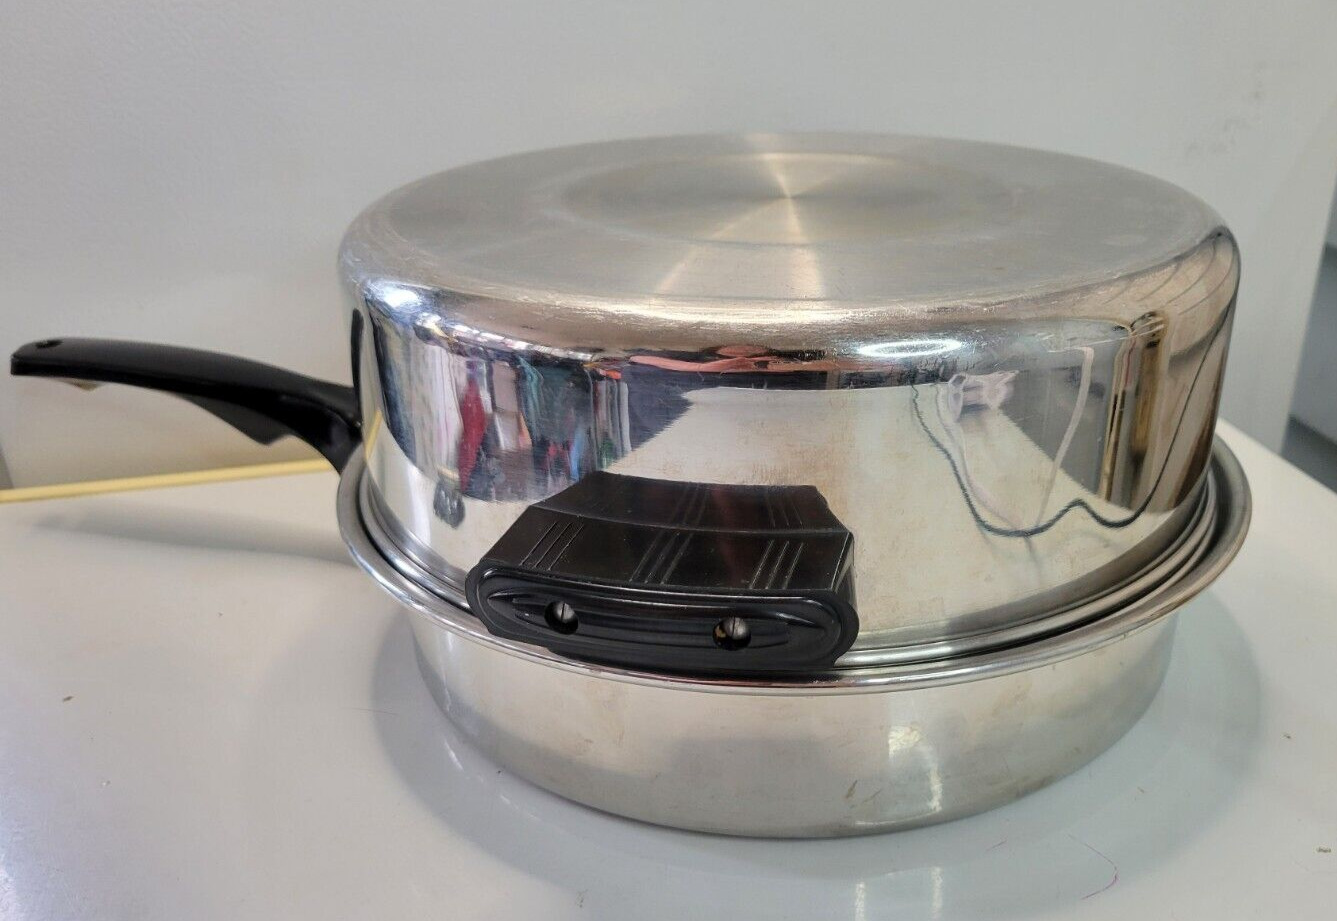 Vintage  Star Brite 3 Ply Stainless Steel 7-41 Fry Pan with Dome Lid Poached Egg